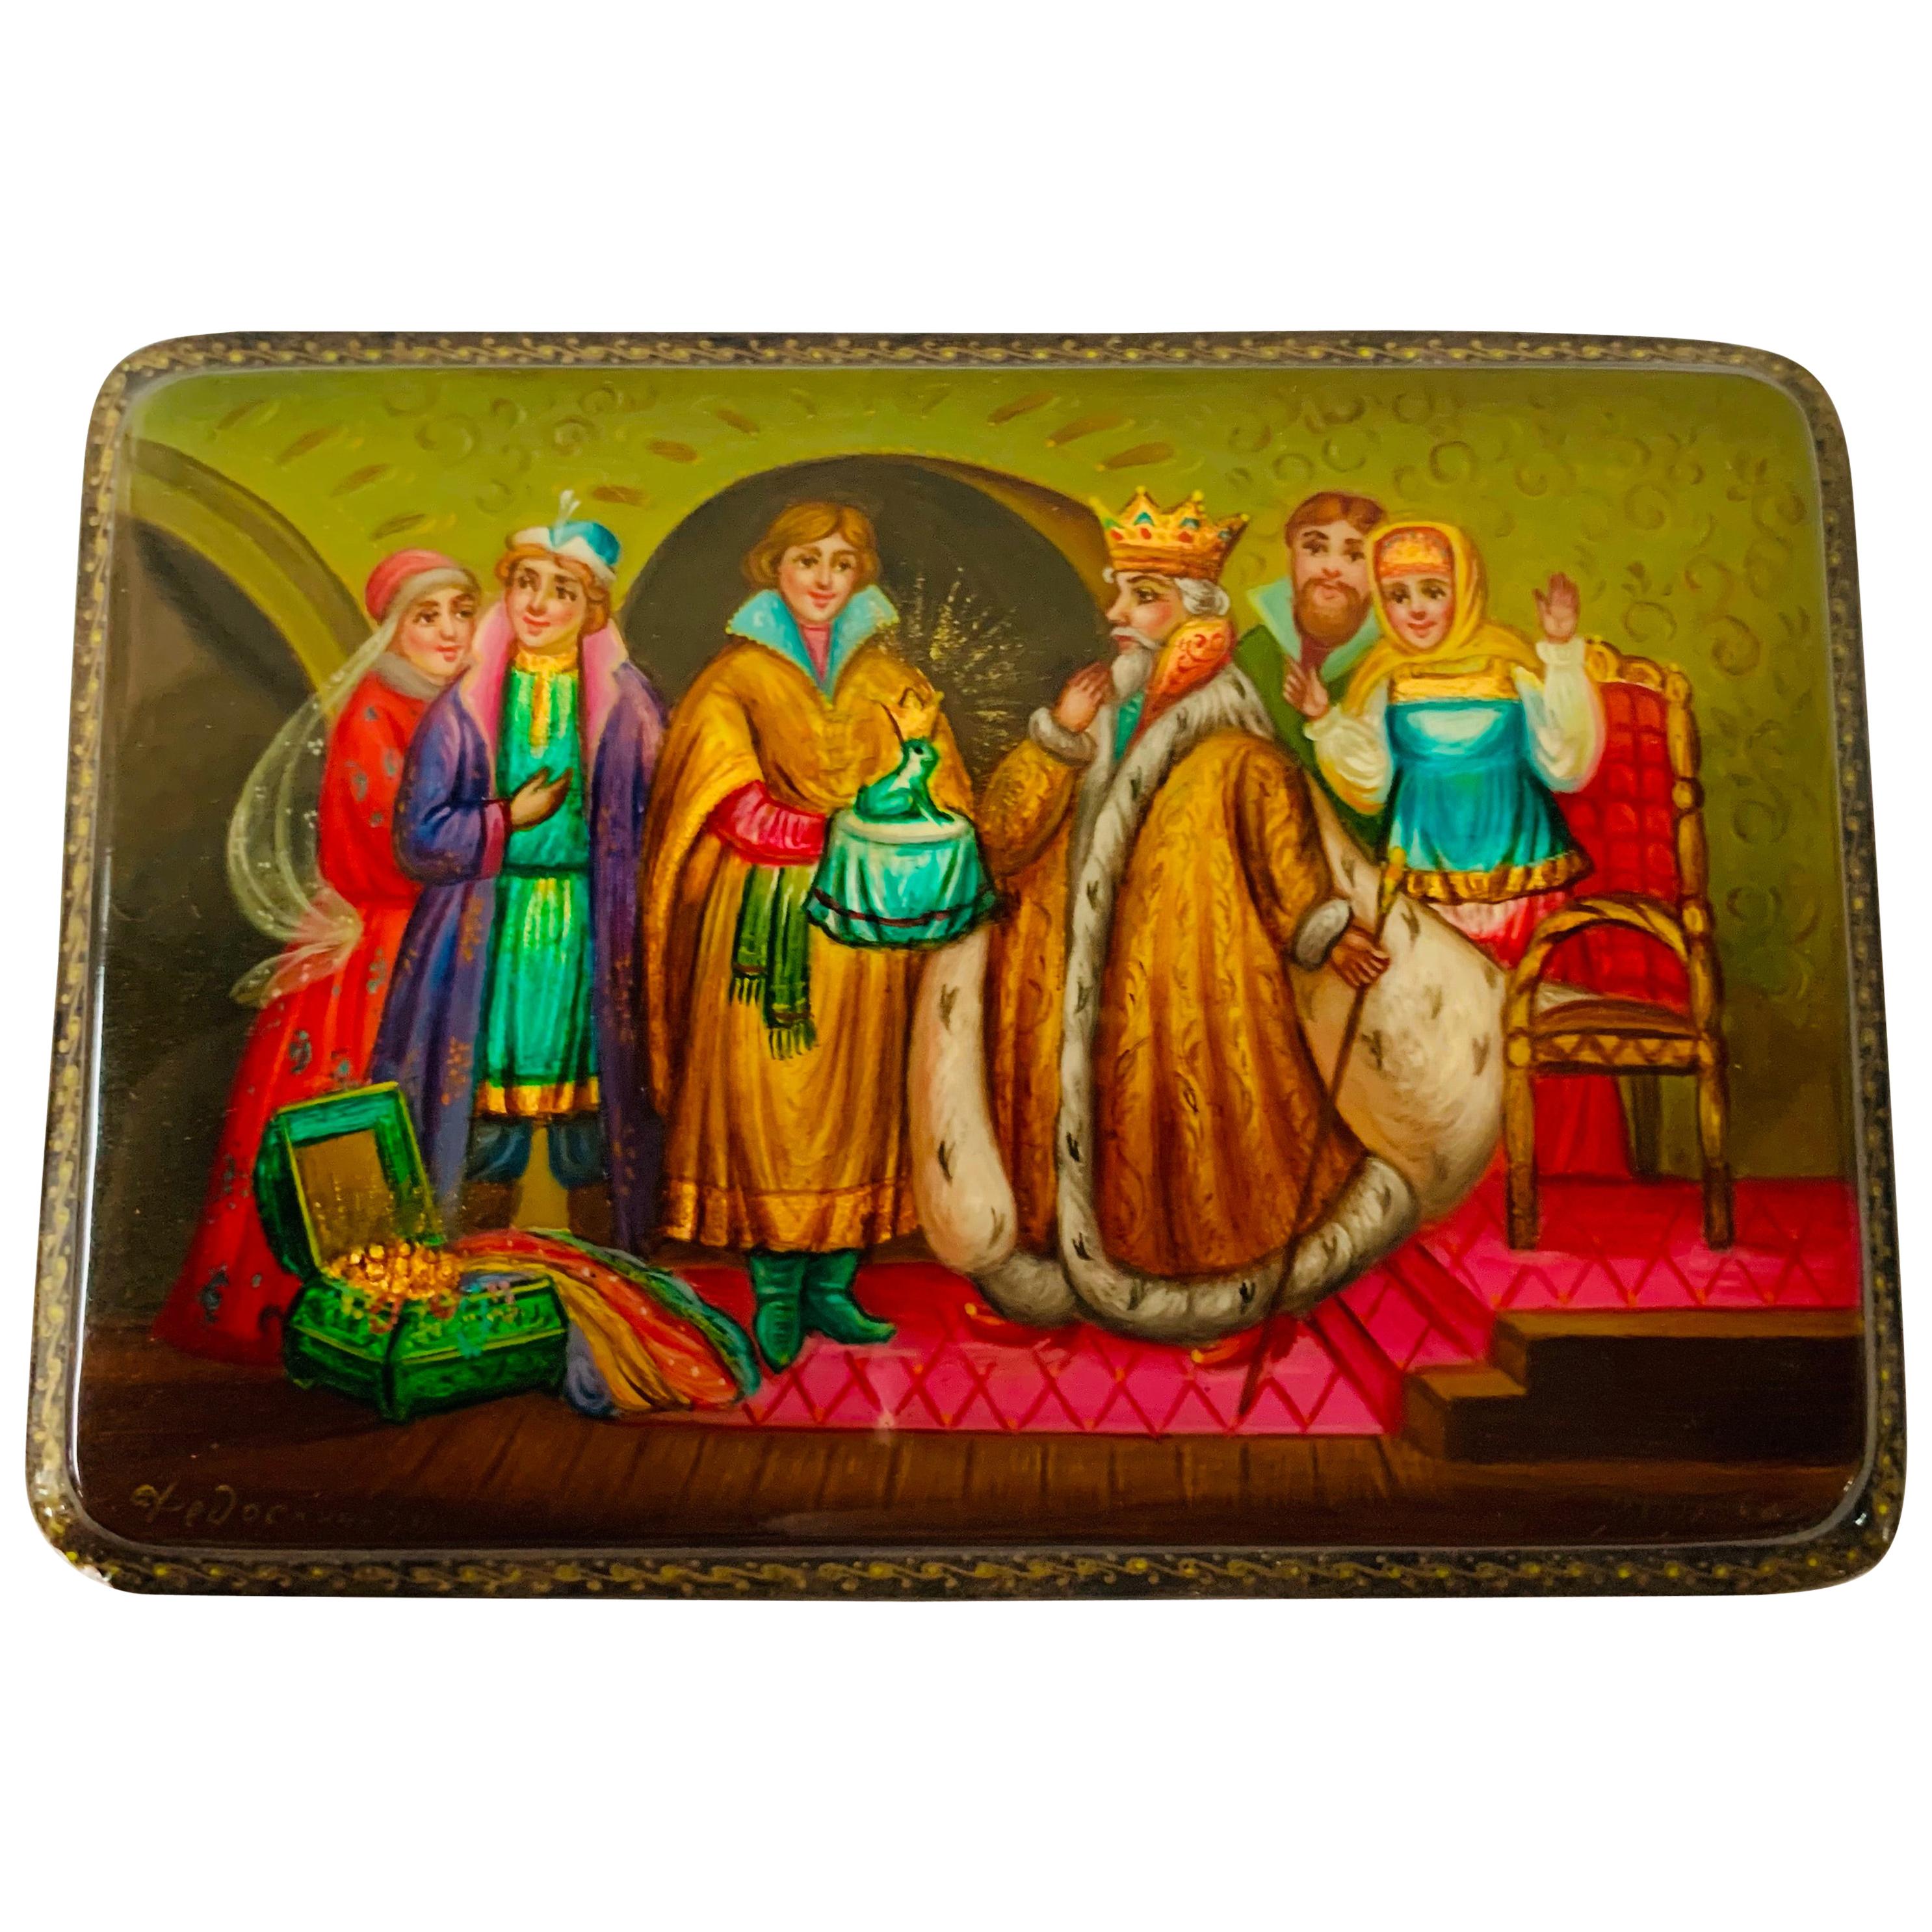 Hand Painted Wood Trinket Box from Russia Wood Box with Russian City Keepsake Box Jewelry Box Carved Wood Box